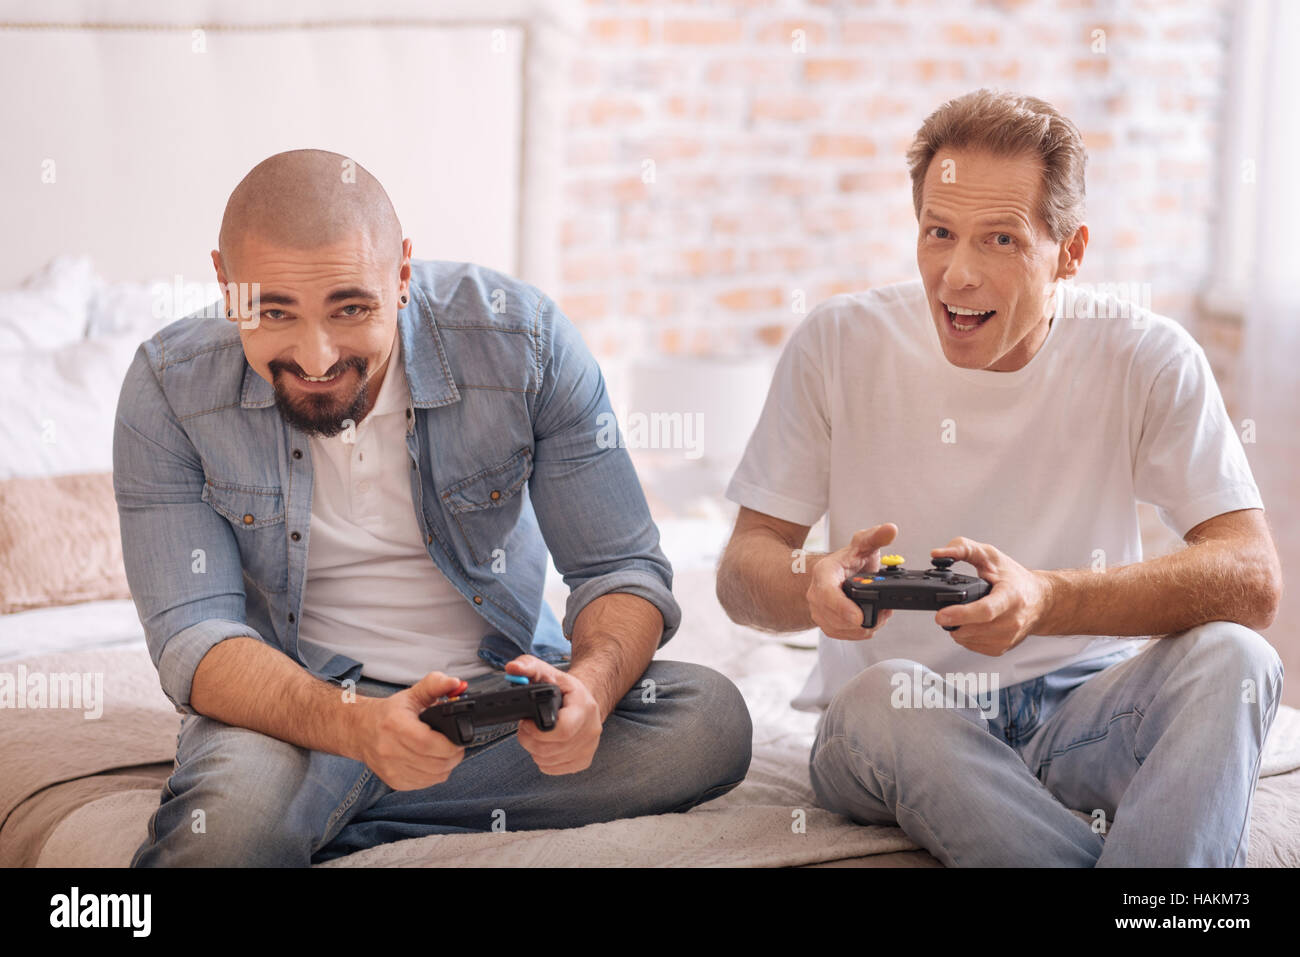 Amused friends playing with game console on the bed Stock Photo